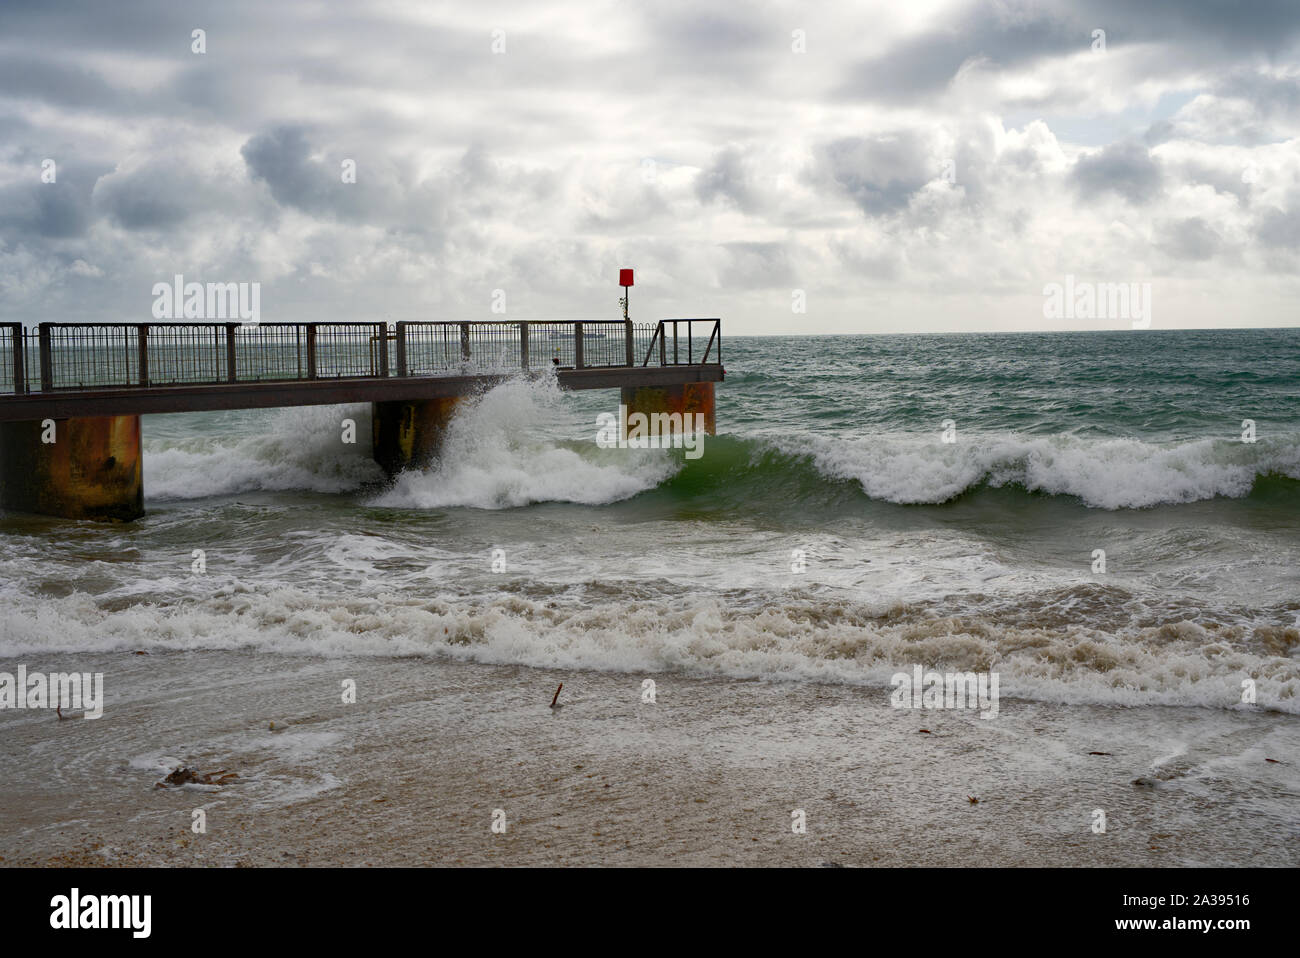 Stormy weather conditions at Bowleaze Cove, Weymouth, Dorset Stock Photo